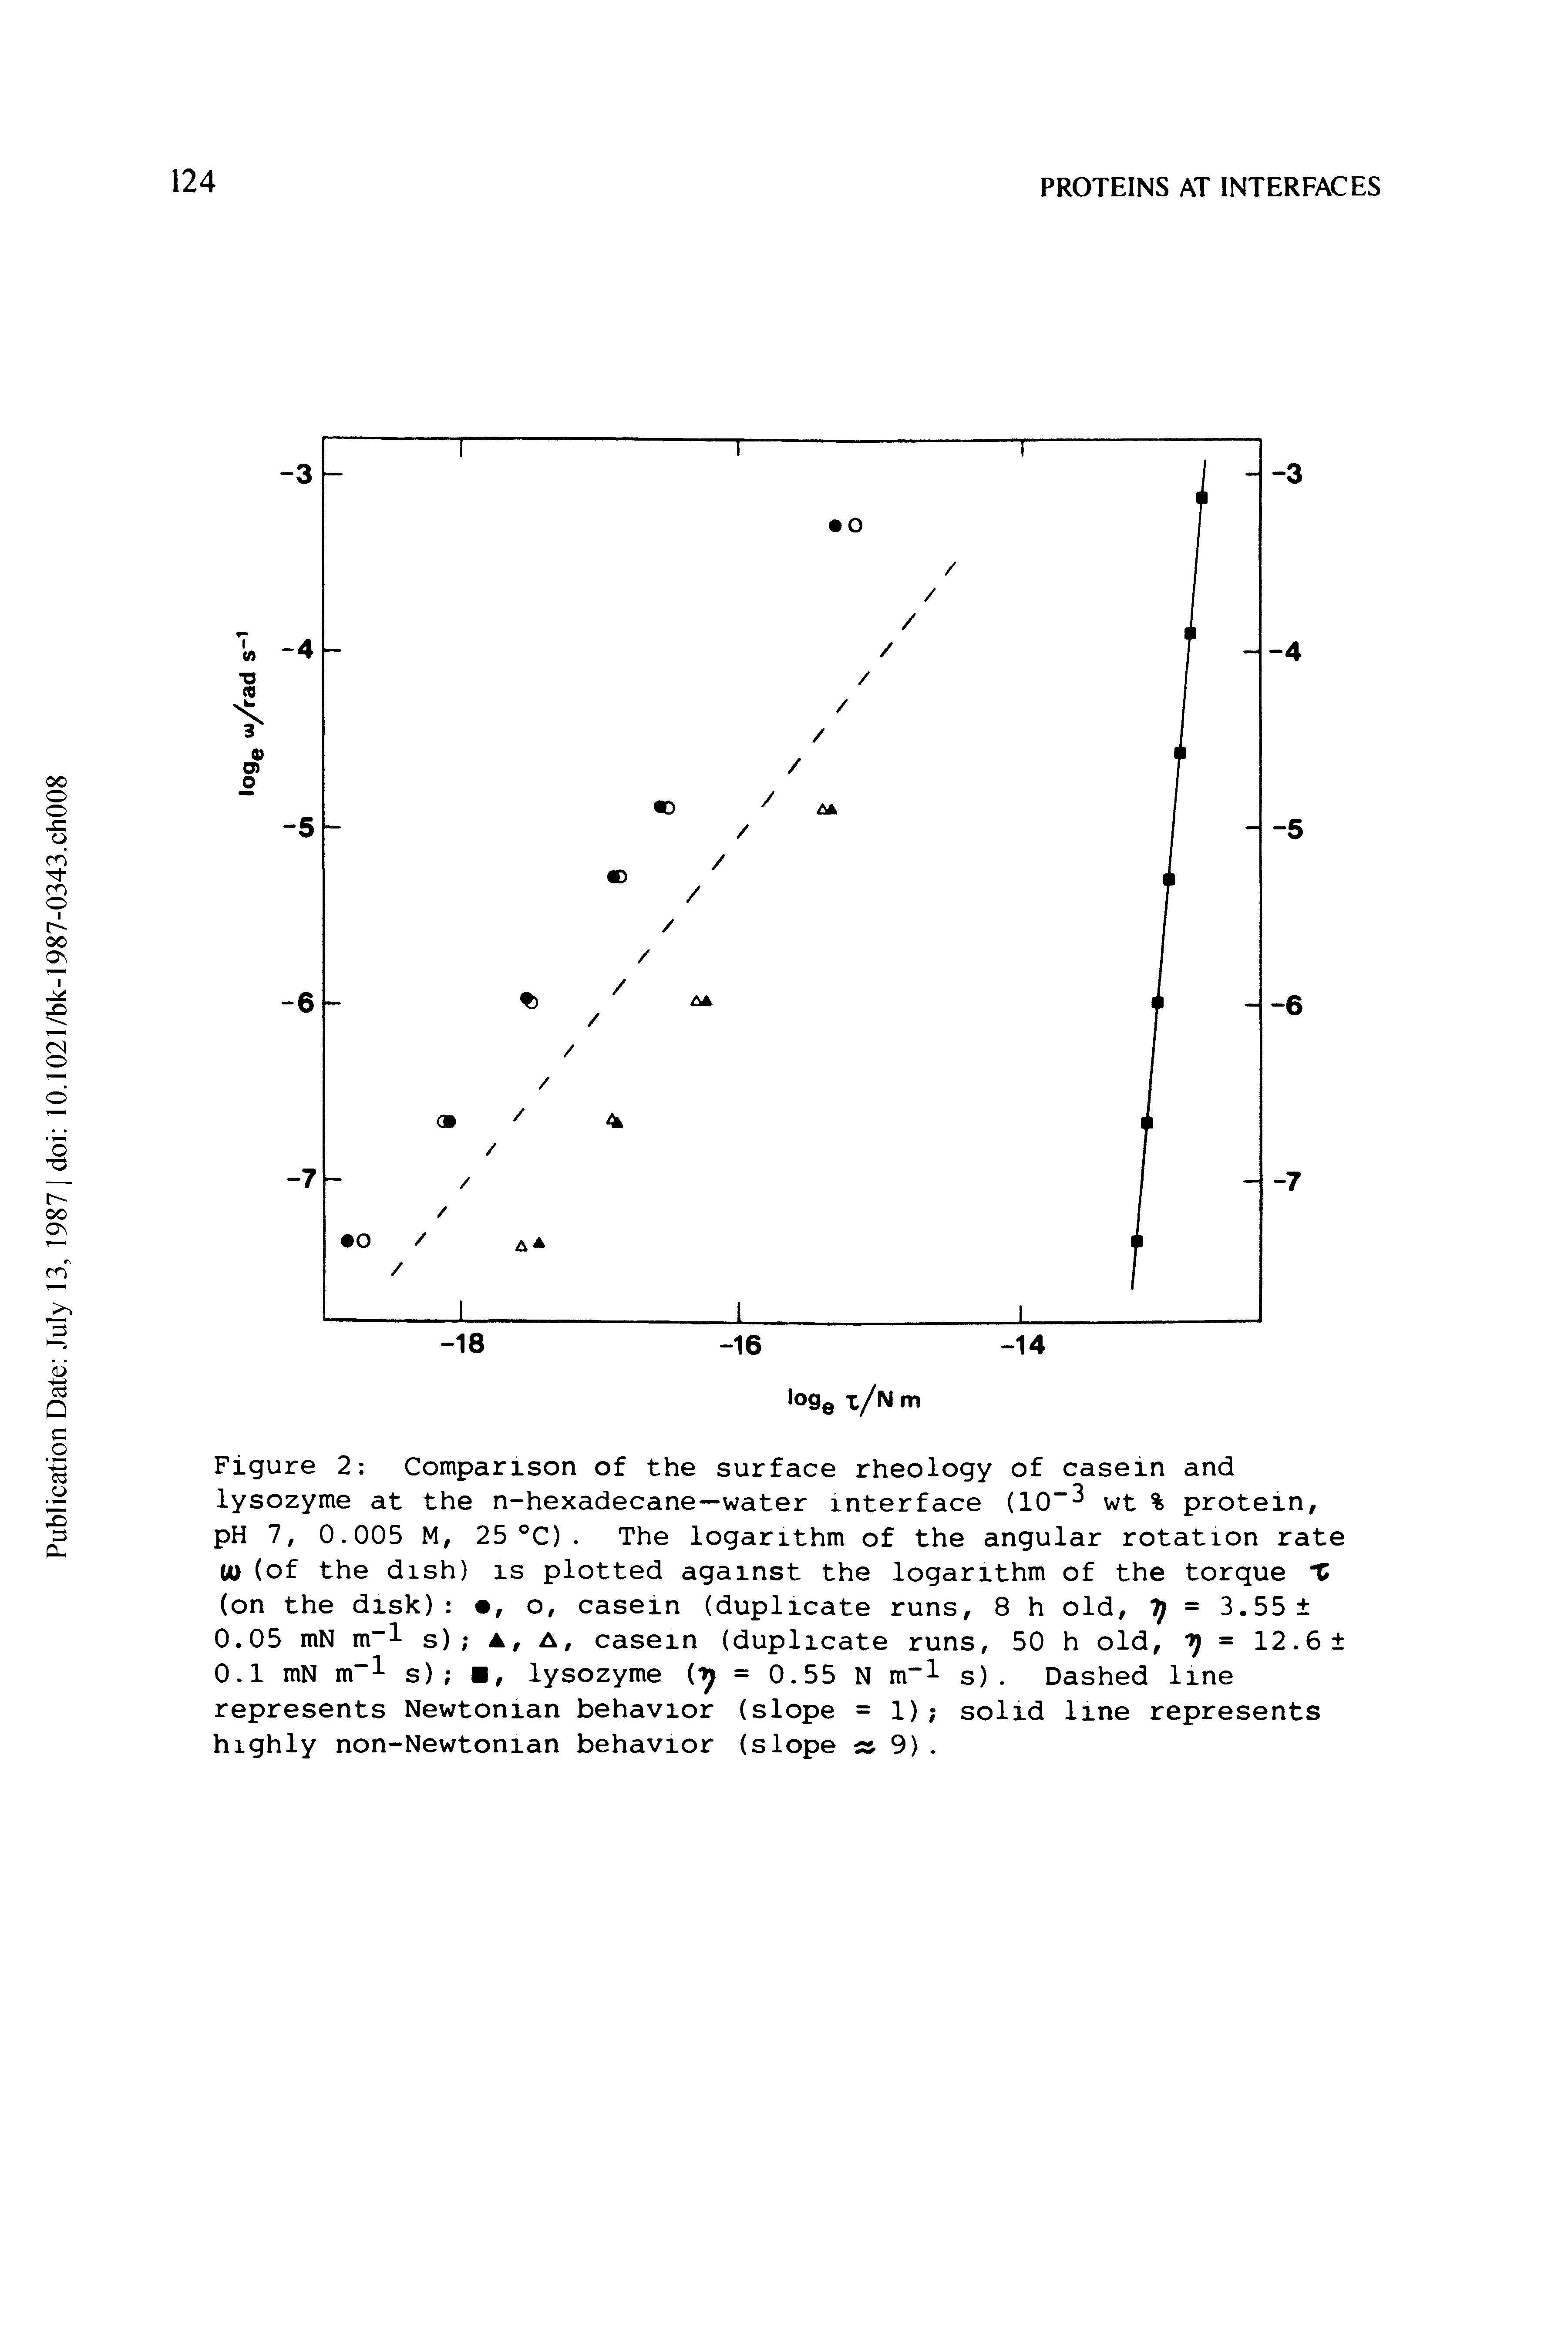 Figure 2 Comparison of the surface rheology of casein and lysozyme at the n-hexadecane—water interface (10 wt % protein, pH 1, 0.005 M, 25 °C). The logarithm of the angular rotation rate U> (of the dish) is plotted against the logarithm of the torque X (on the disk) , o, casein (duplicate runs, 8 h old, If - 3.55 0.05 mN m"l s) , A, casein (duplicate runs, 50 h old, = 12.6 0.1 mN m l s) , lysozyme ( = 0.55 N m l s). Dashed line represents Newtonian behavior (slope = 1) solid line represents highly non-Newtonian behavior (slope 9).